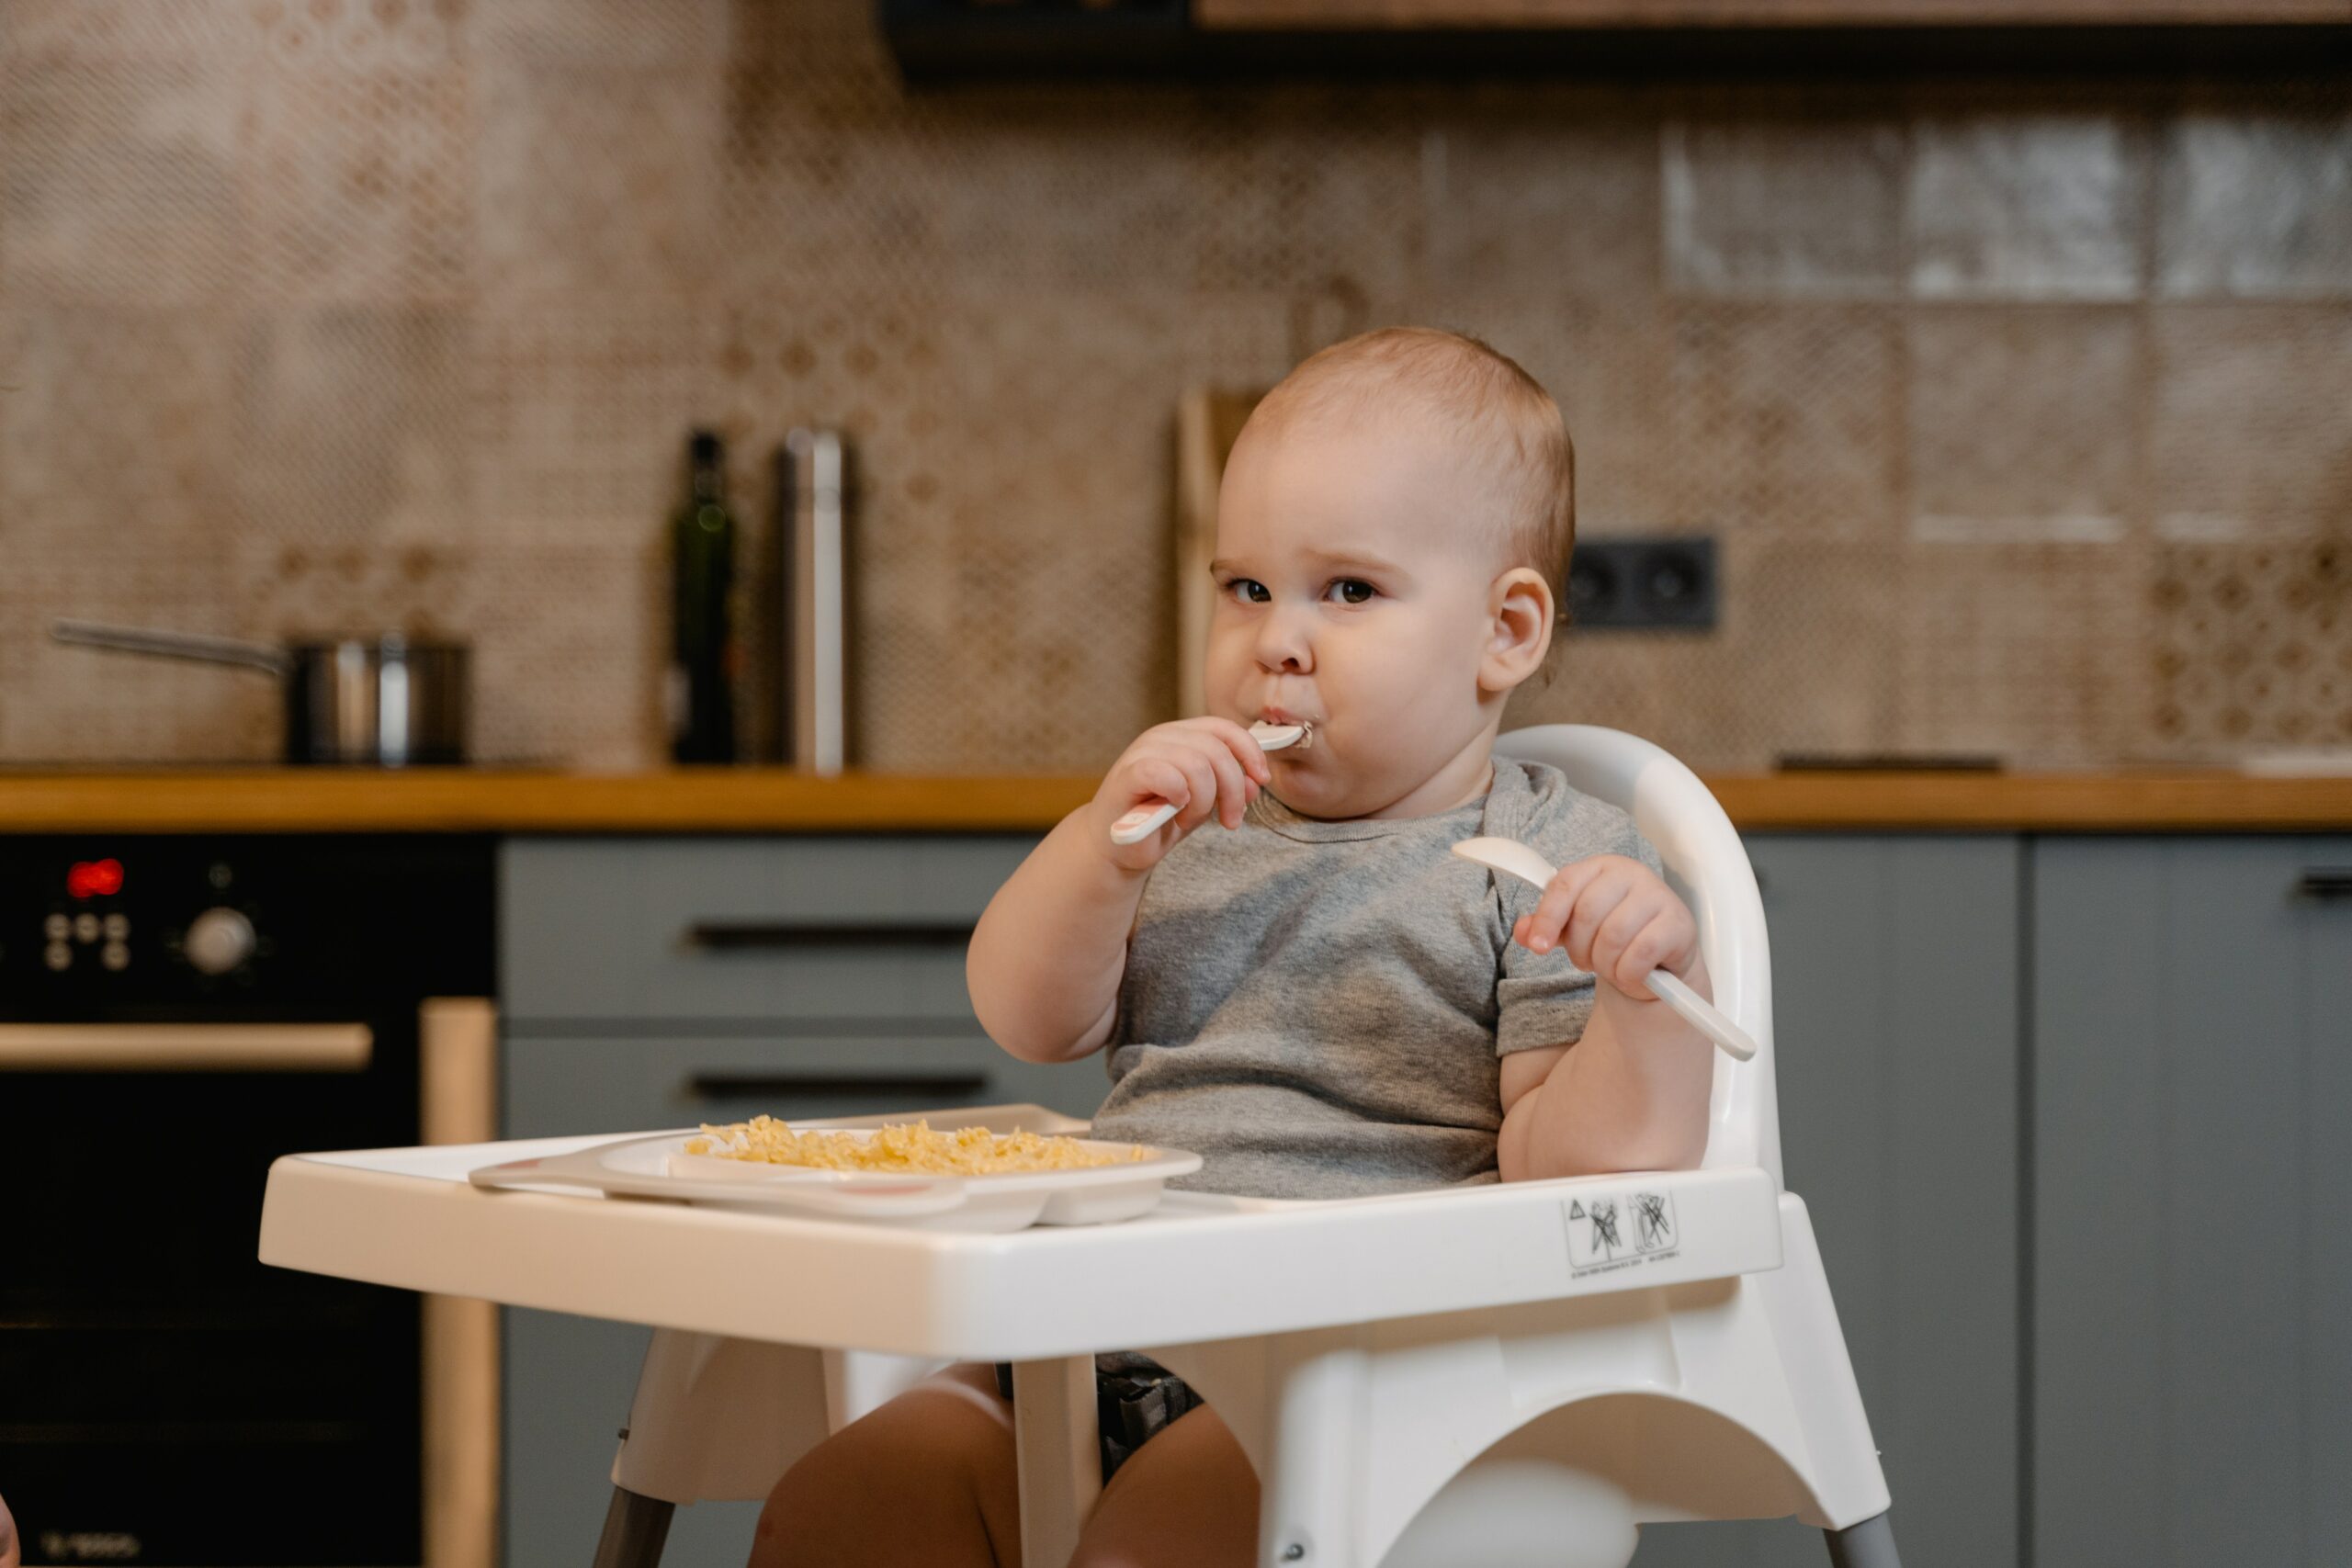 <p>Feeding on the go can be challenging, especially when high chairs are not always available. Enter Totseat, a portable fabric high chair that easily adjusts to fit any chair. Its ingenious design is compact enough to fit in your handbag, and installation is a breeze. Plus, it's machine washable, because we all know those spaghetti stains are inevitable. Never again will you have to battle balancing a baby on your knee while attempting to eat your meal. </p>